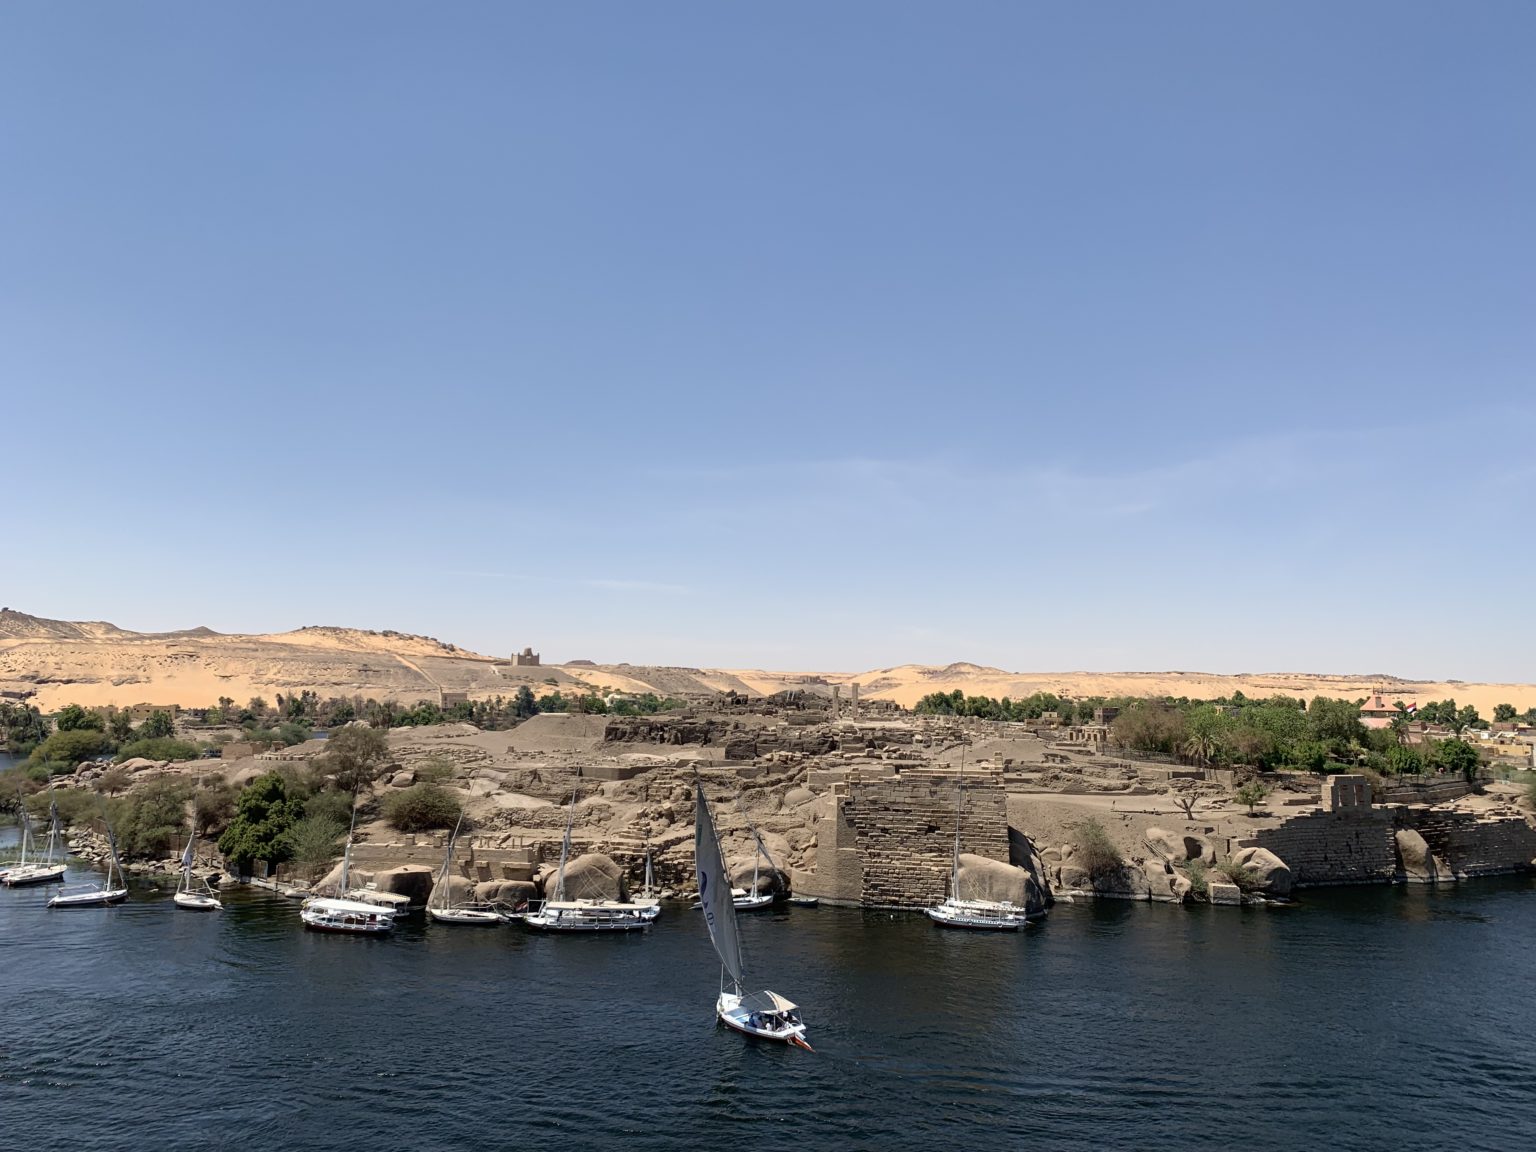 Aswan city as seen from perspective of the river